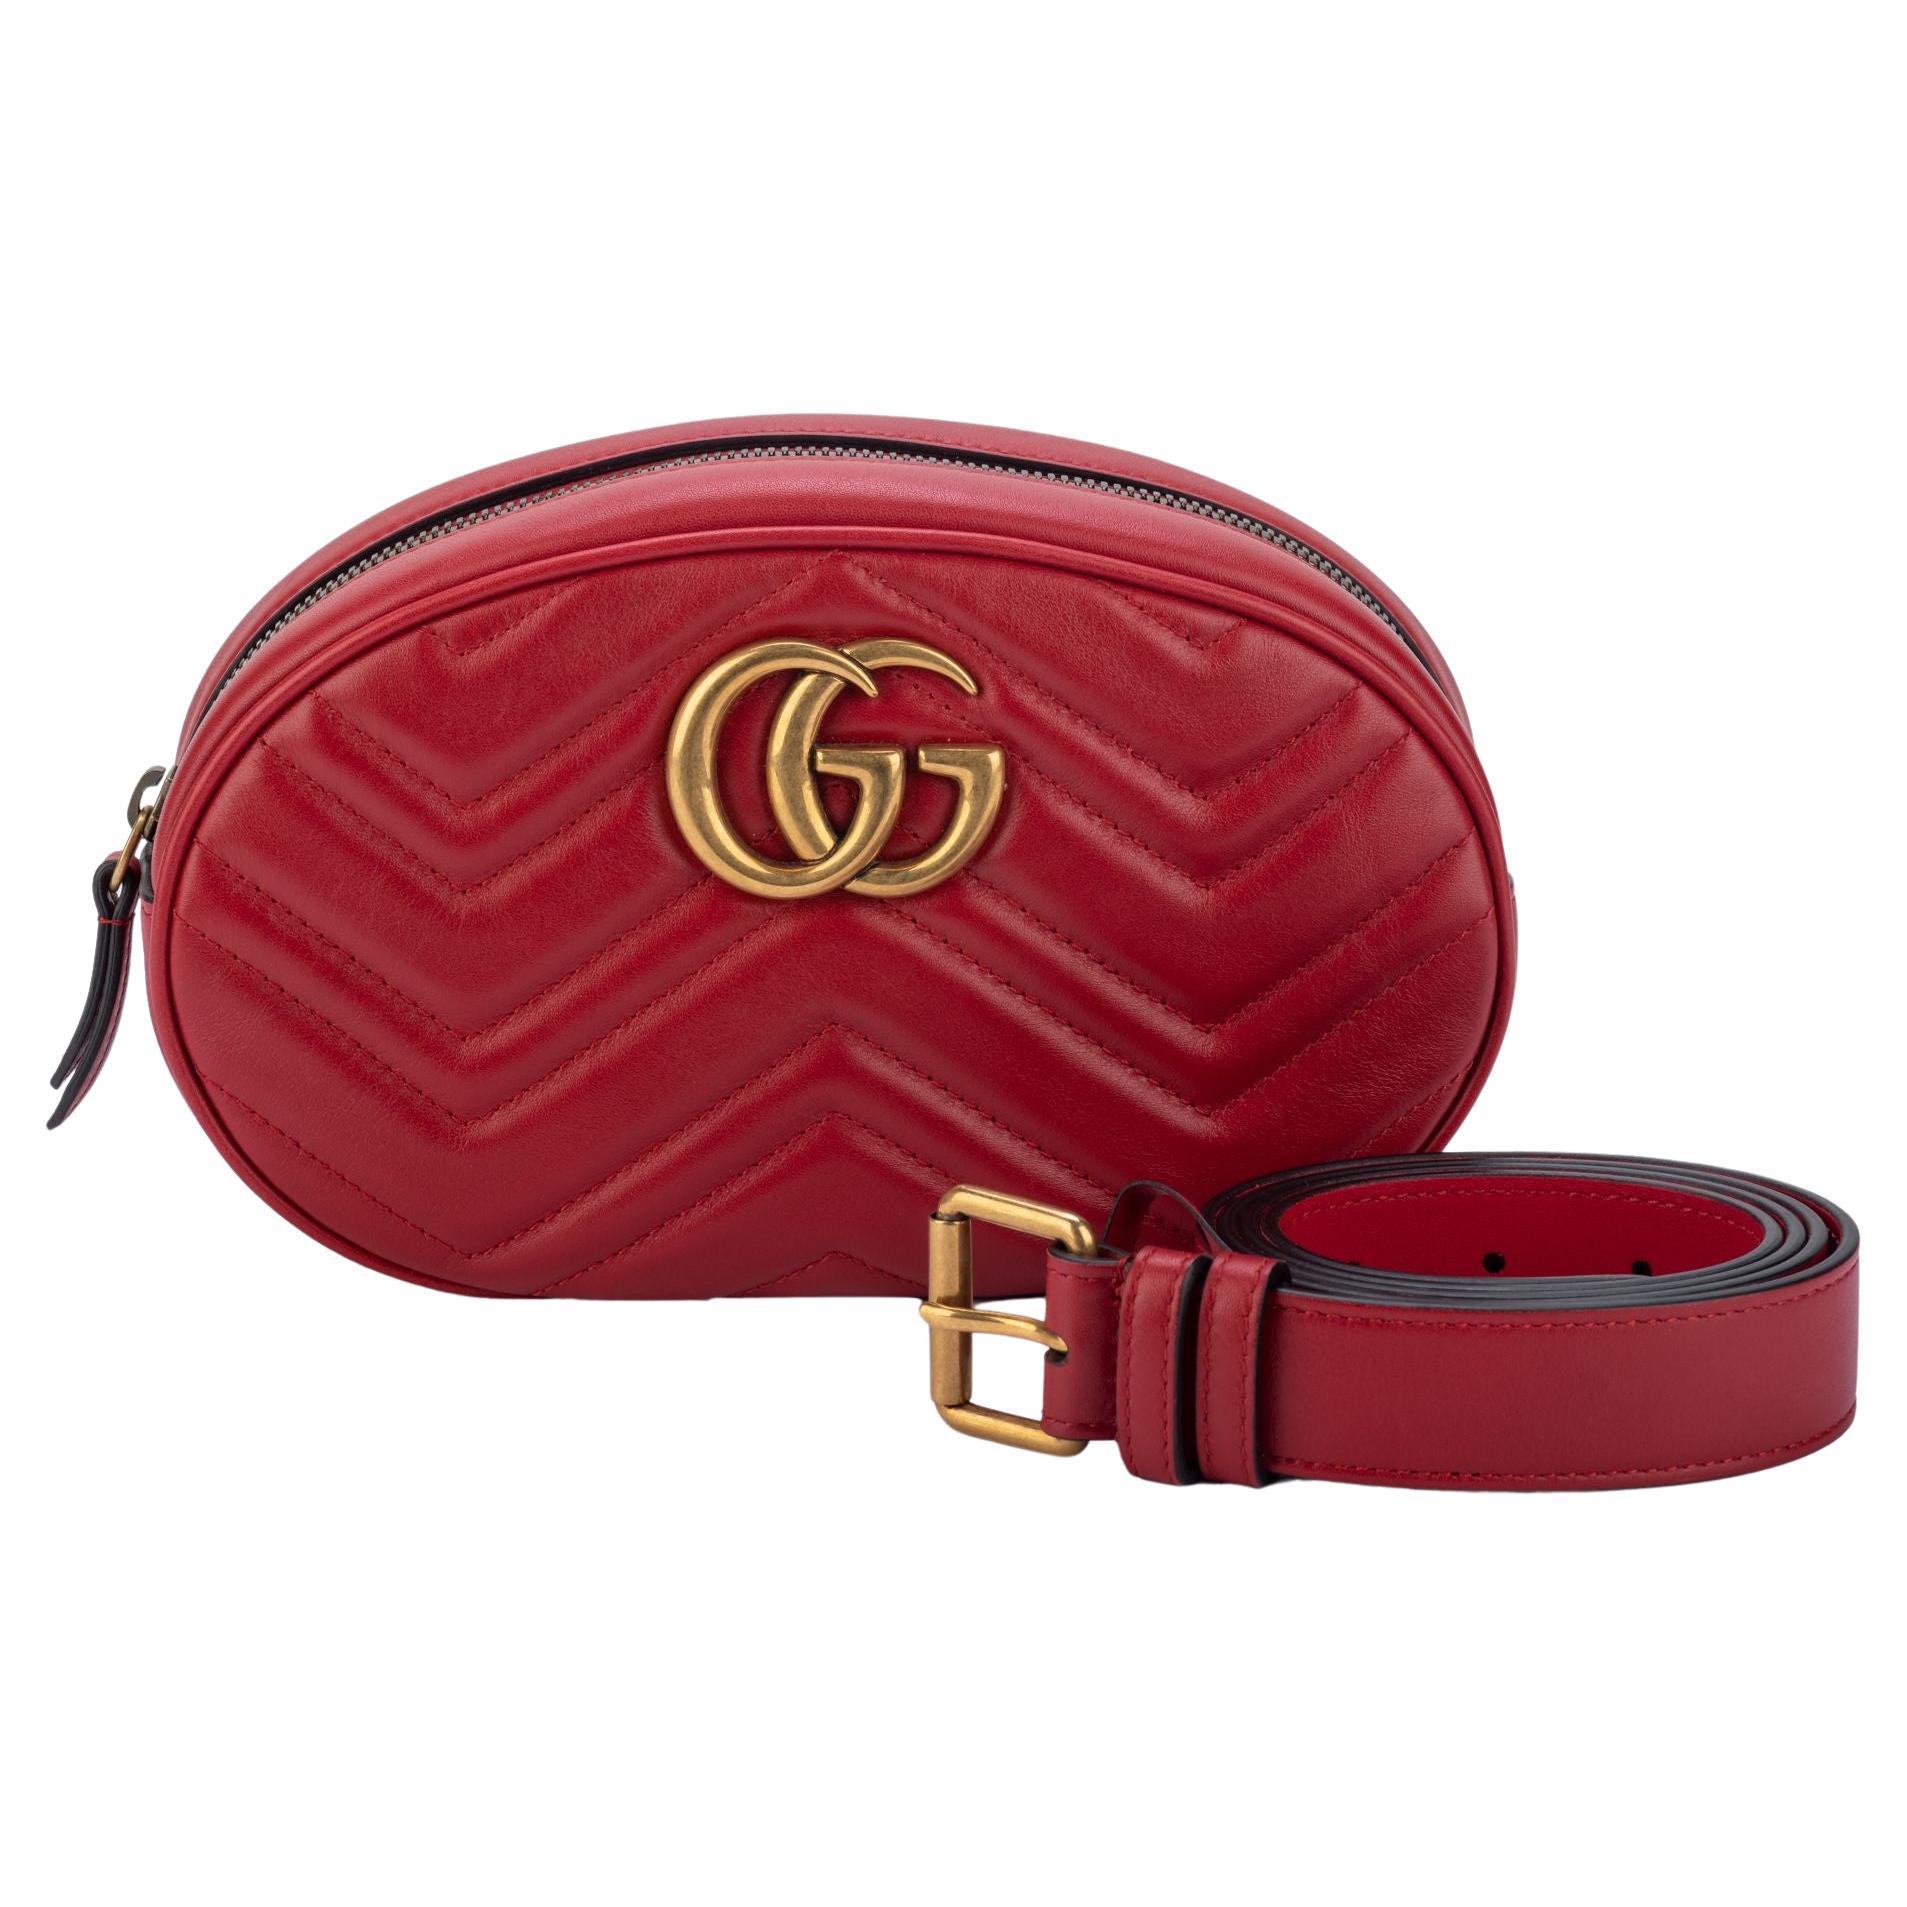 Giant Gucci GG Belt Bag Review & What Fits. 